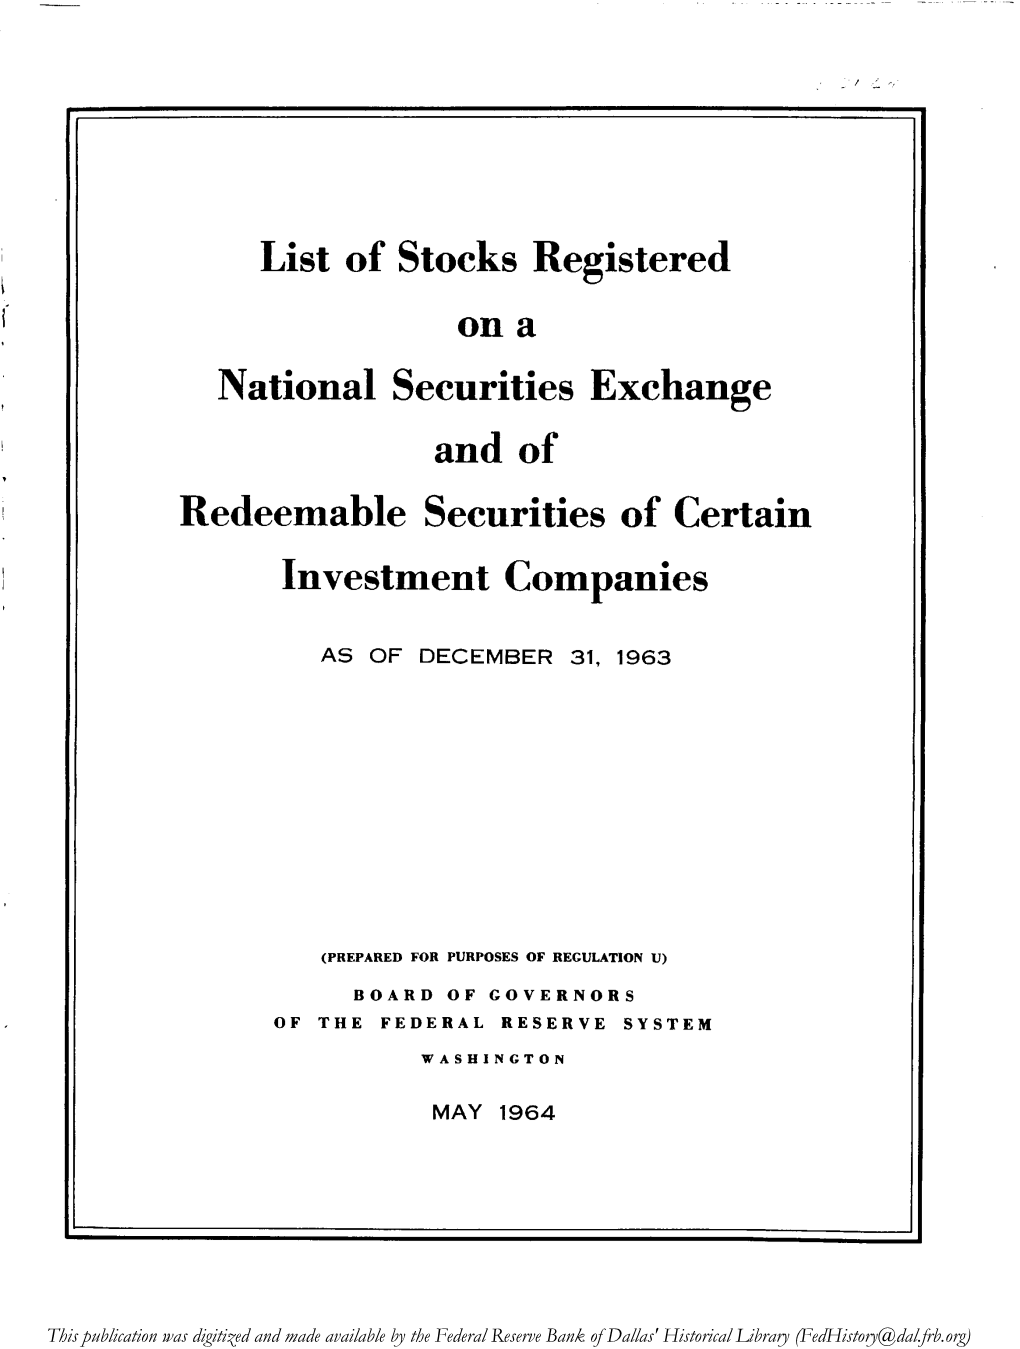 List of Stocks Registered on a National Securities Exchange and of Redeemable Securities of Certain Investment Companies